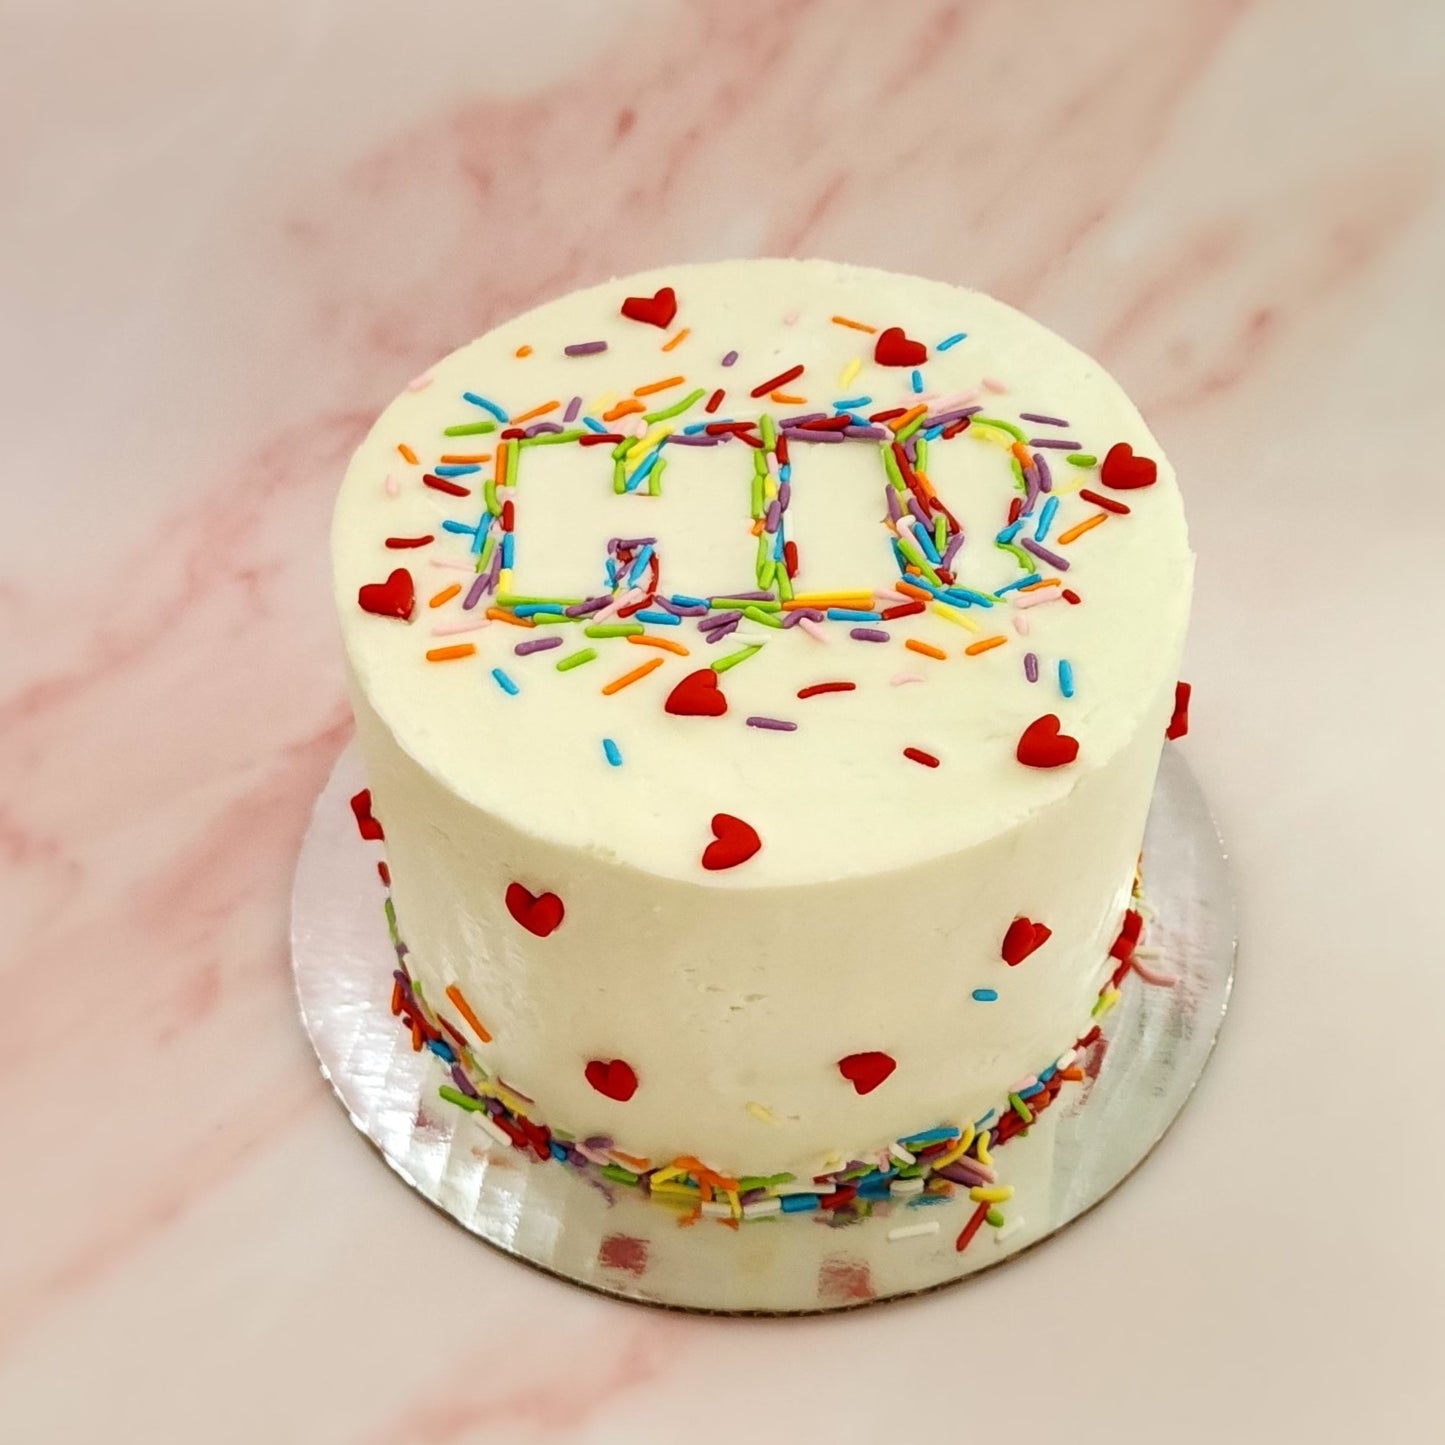 A decorated DIY Just Hi cake. White frosted cake decorated with rainbow sprinkles forming the word "Hi" in the center and cute red fondant hearts dotted around the front and sides of the cake.